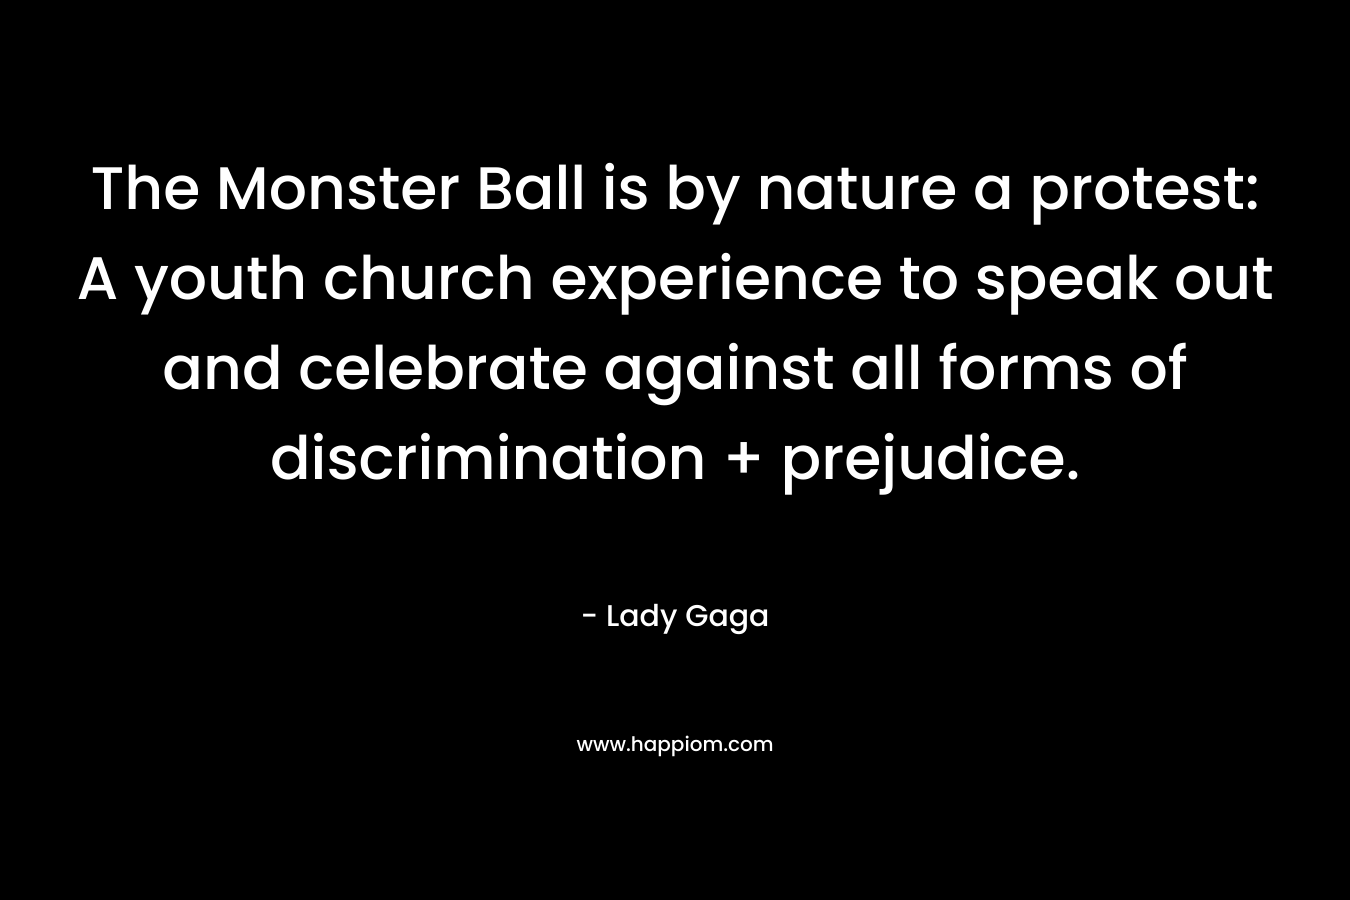 The Monster Ball is by nature a protest: A youth church experience to speak out and celebrate against all forms of discrimination + prejudice.